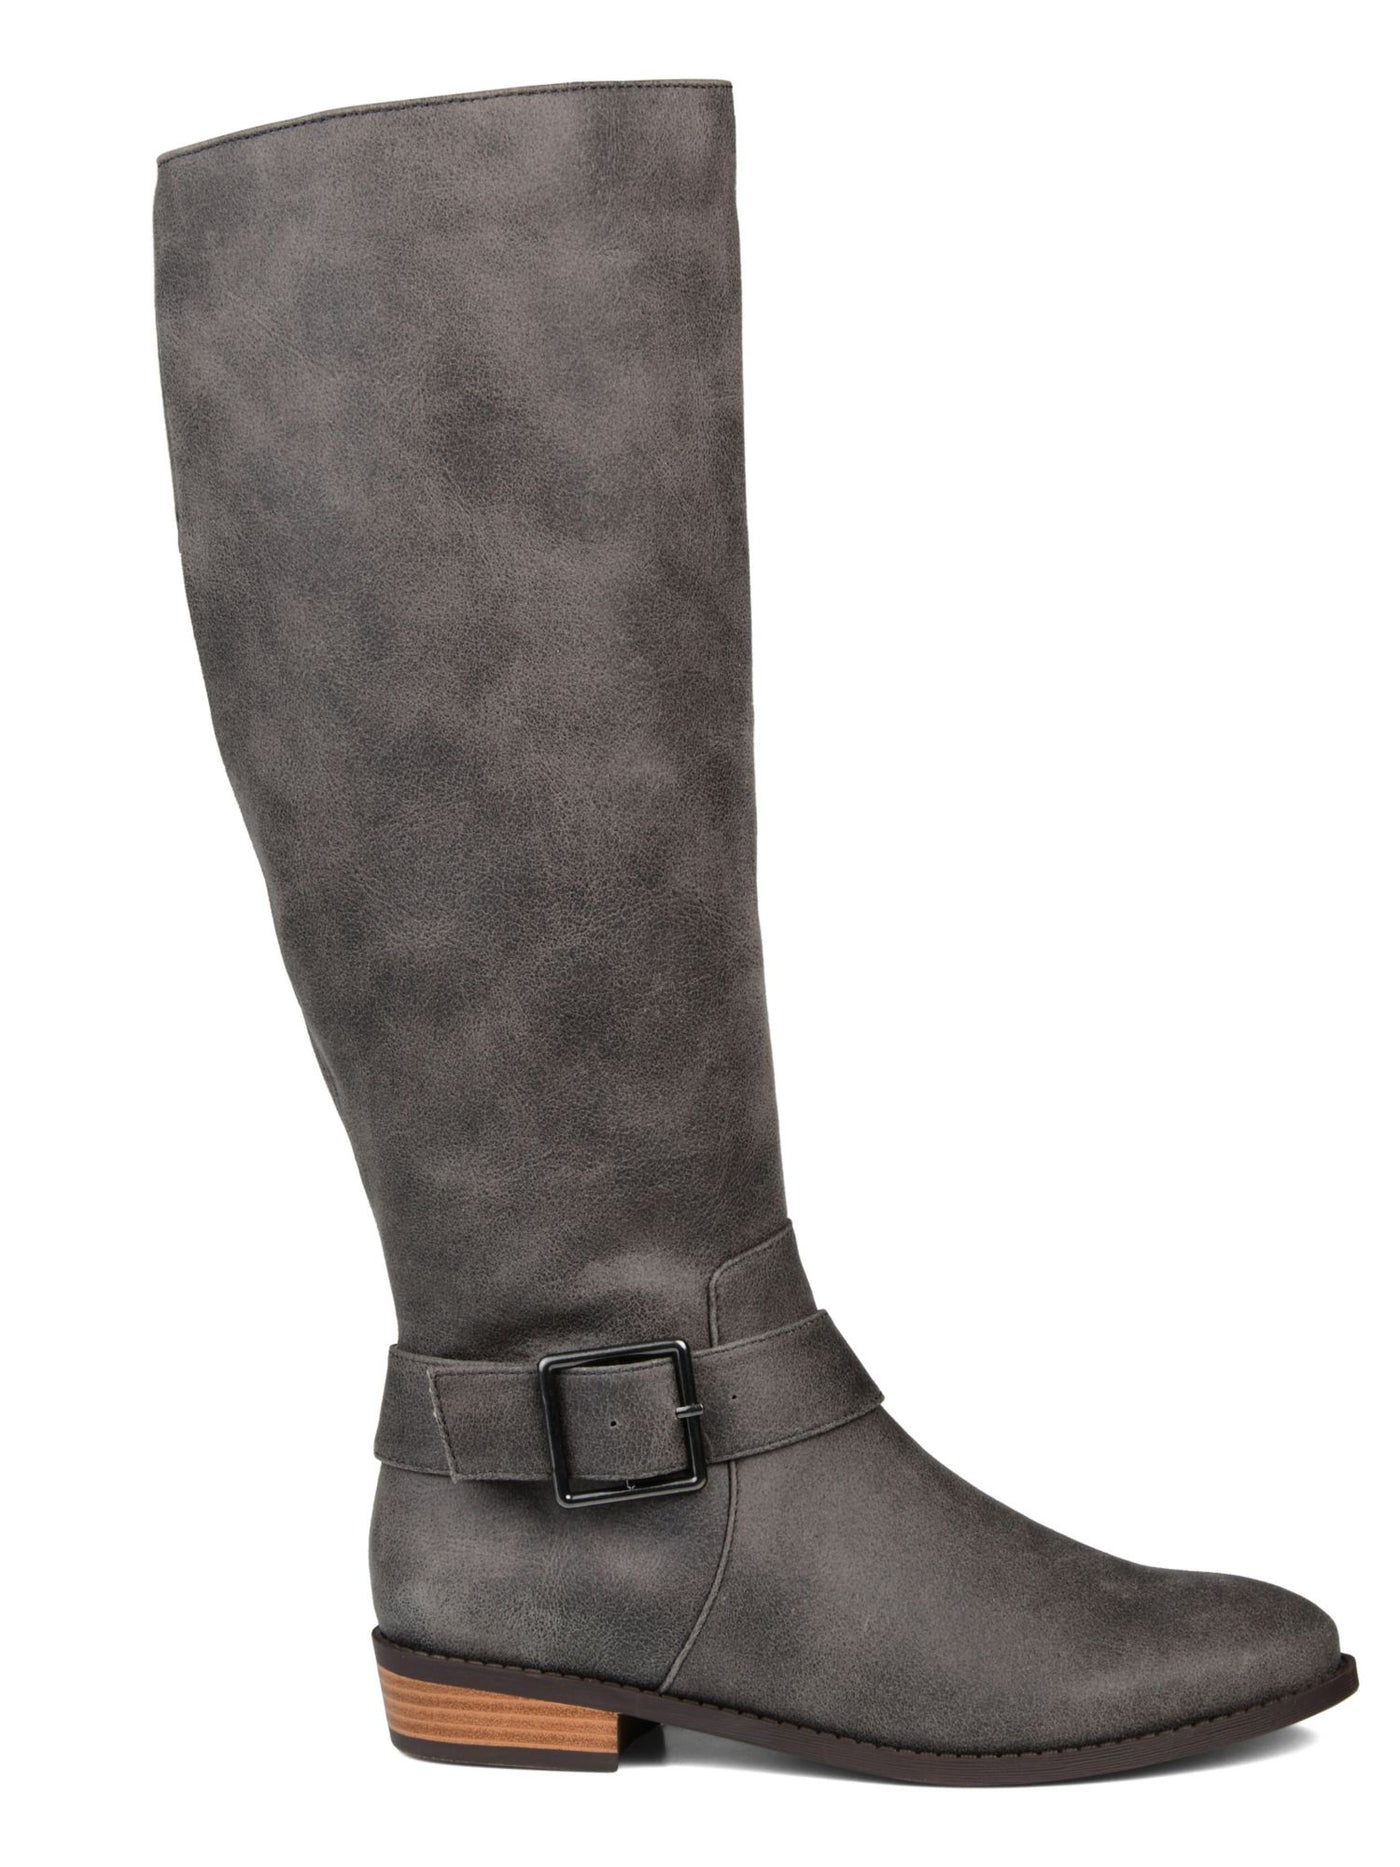 JOURNEE COLLECTION Womens Gray Goring Extra Wide Calf Buckle Accent Extra Wide Calf Winona Almond Toe Block Heel Zip-Up Riding Boot 6.5 XWC